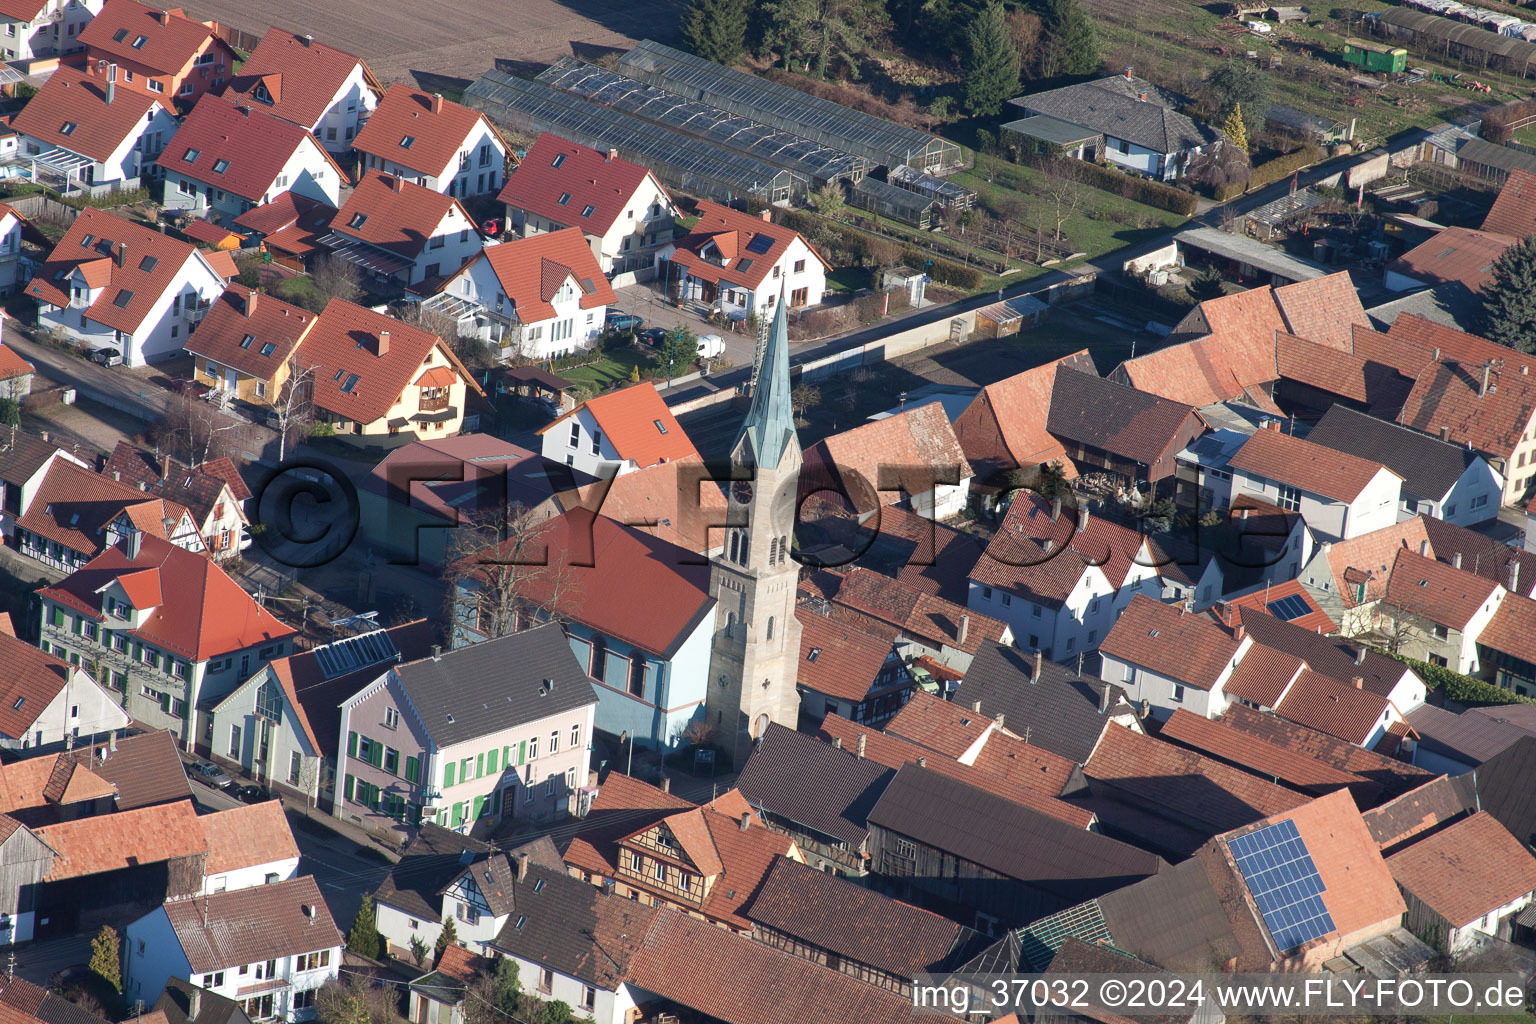 Aerial view of From the southwest in Erlenbach bei Kandel in the state Rhineland-Palatinate, Germany